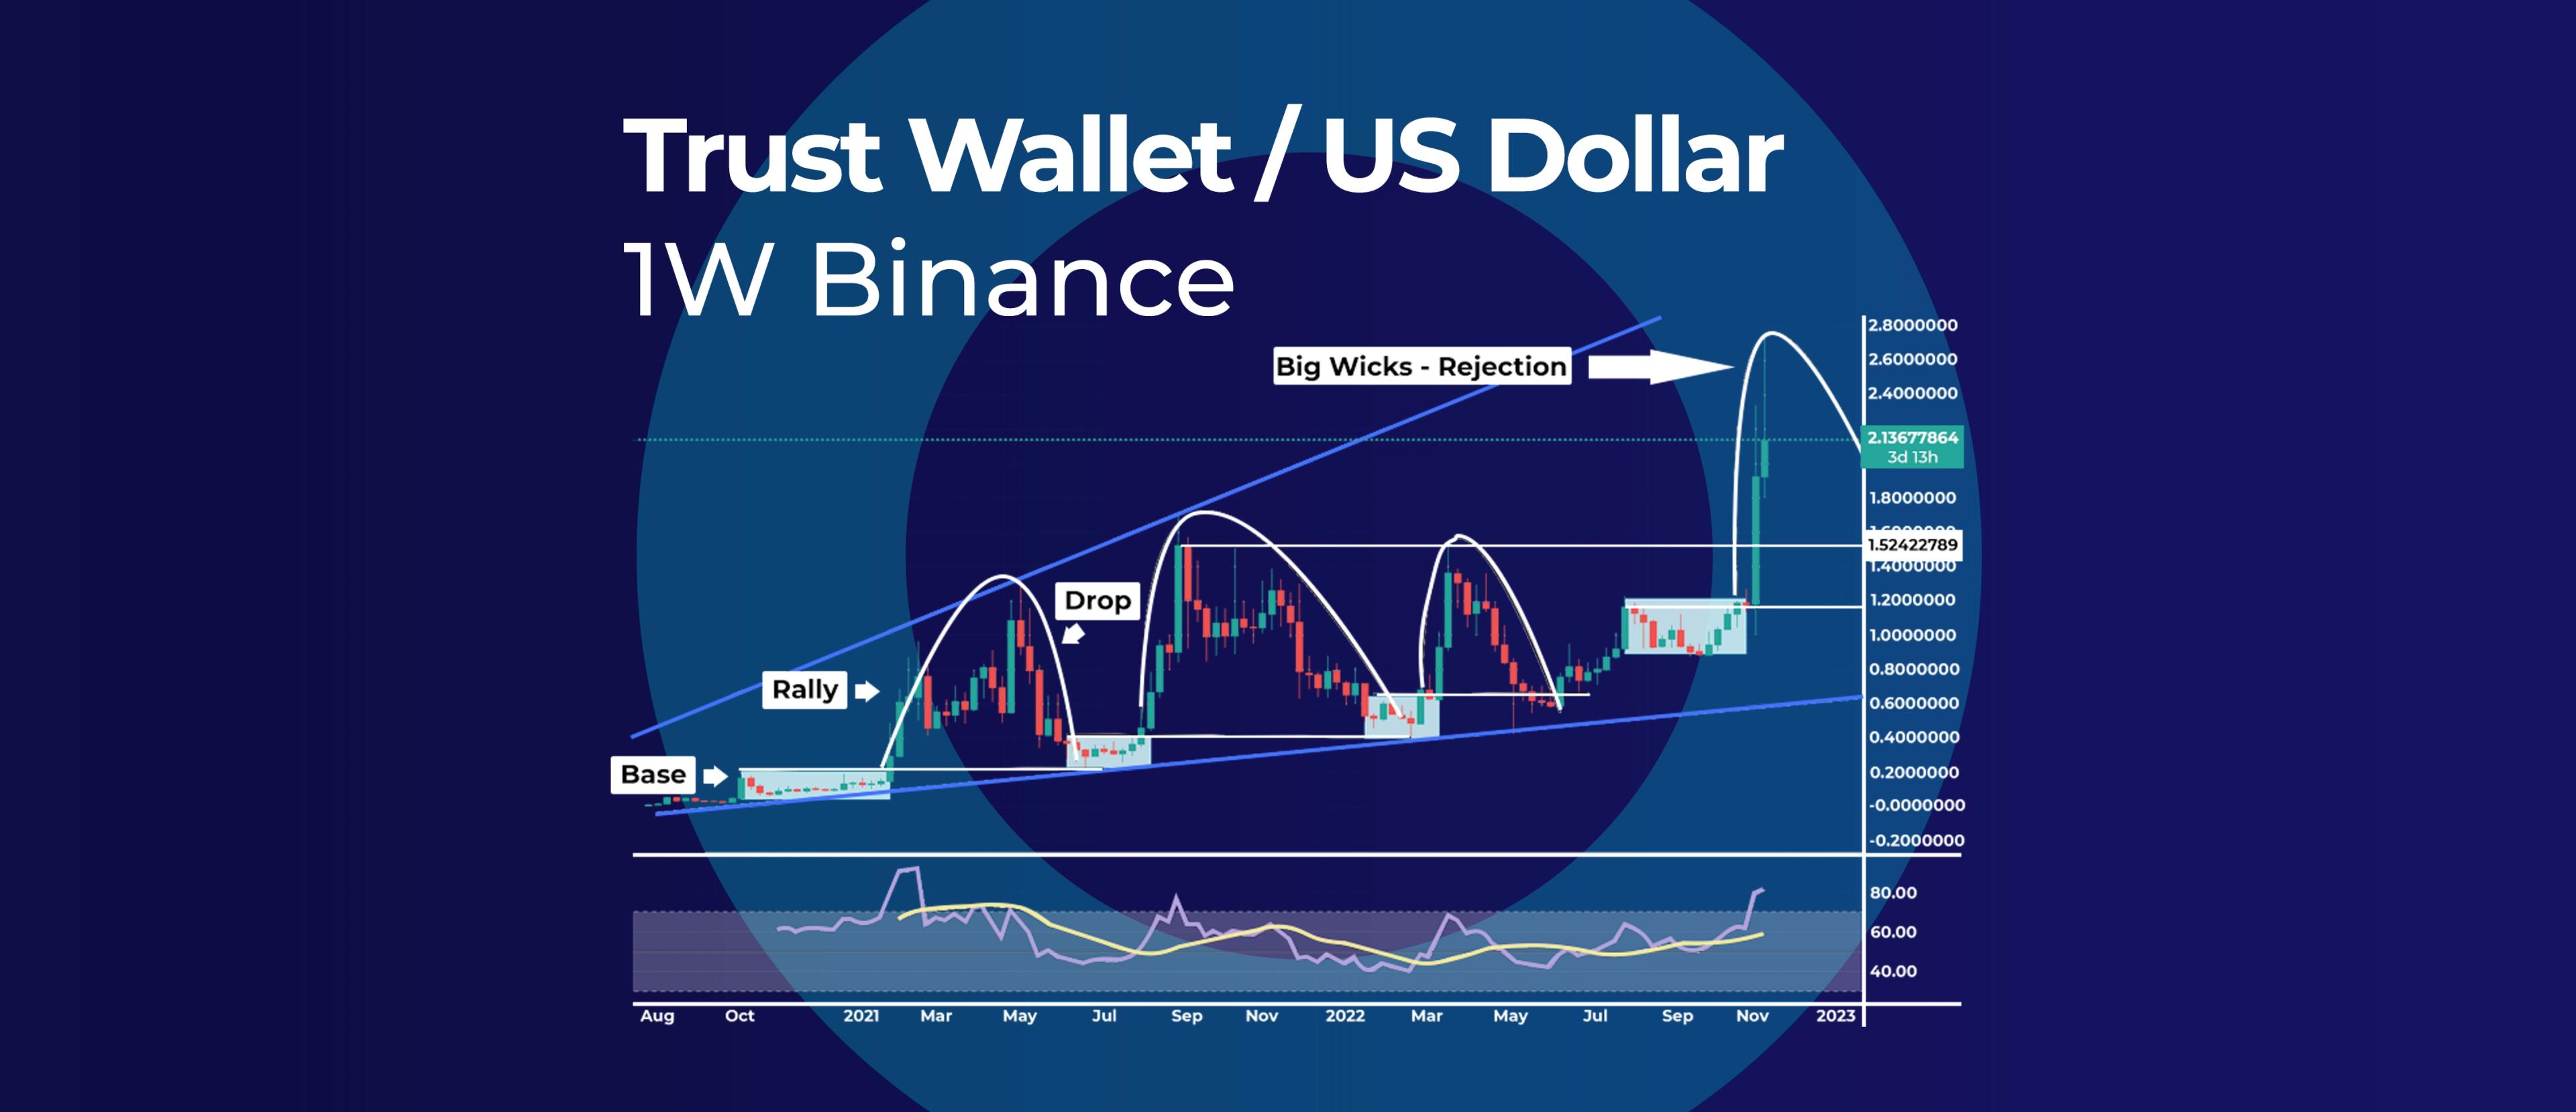 Trust Wallet Token New All-Time High, What’s Next?